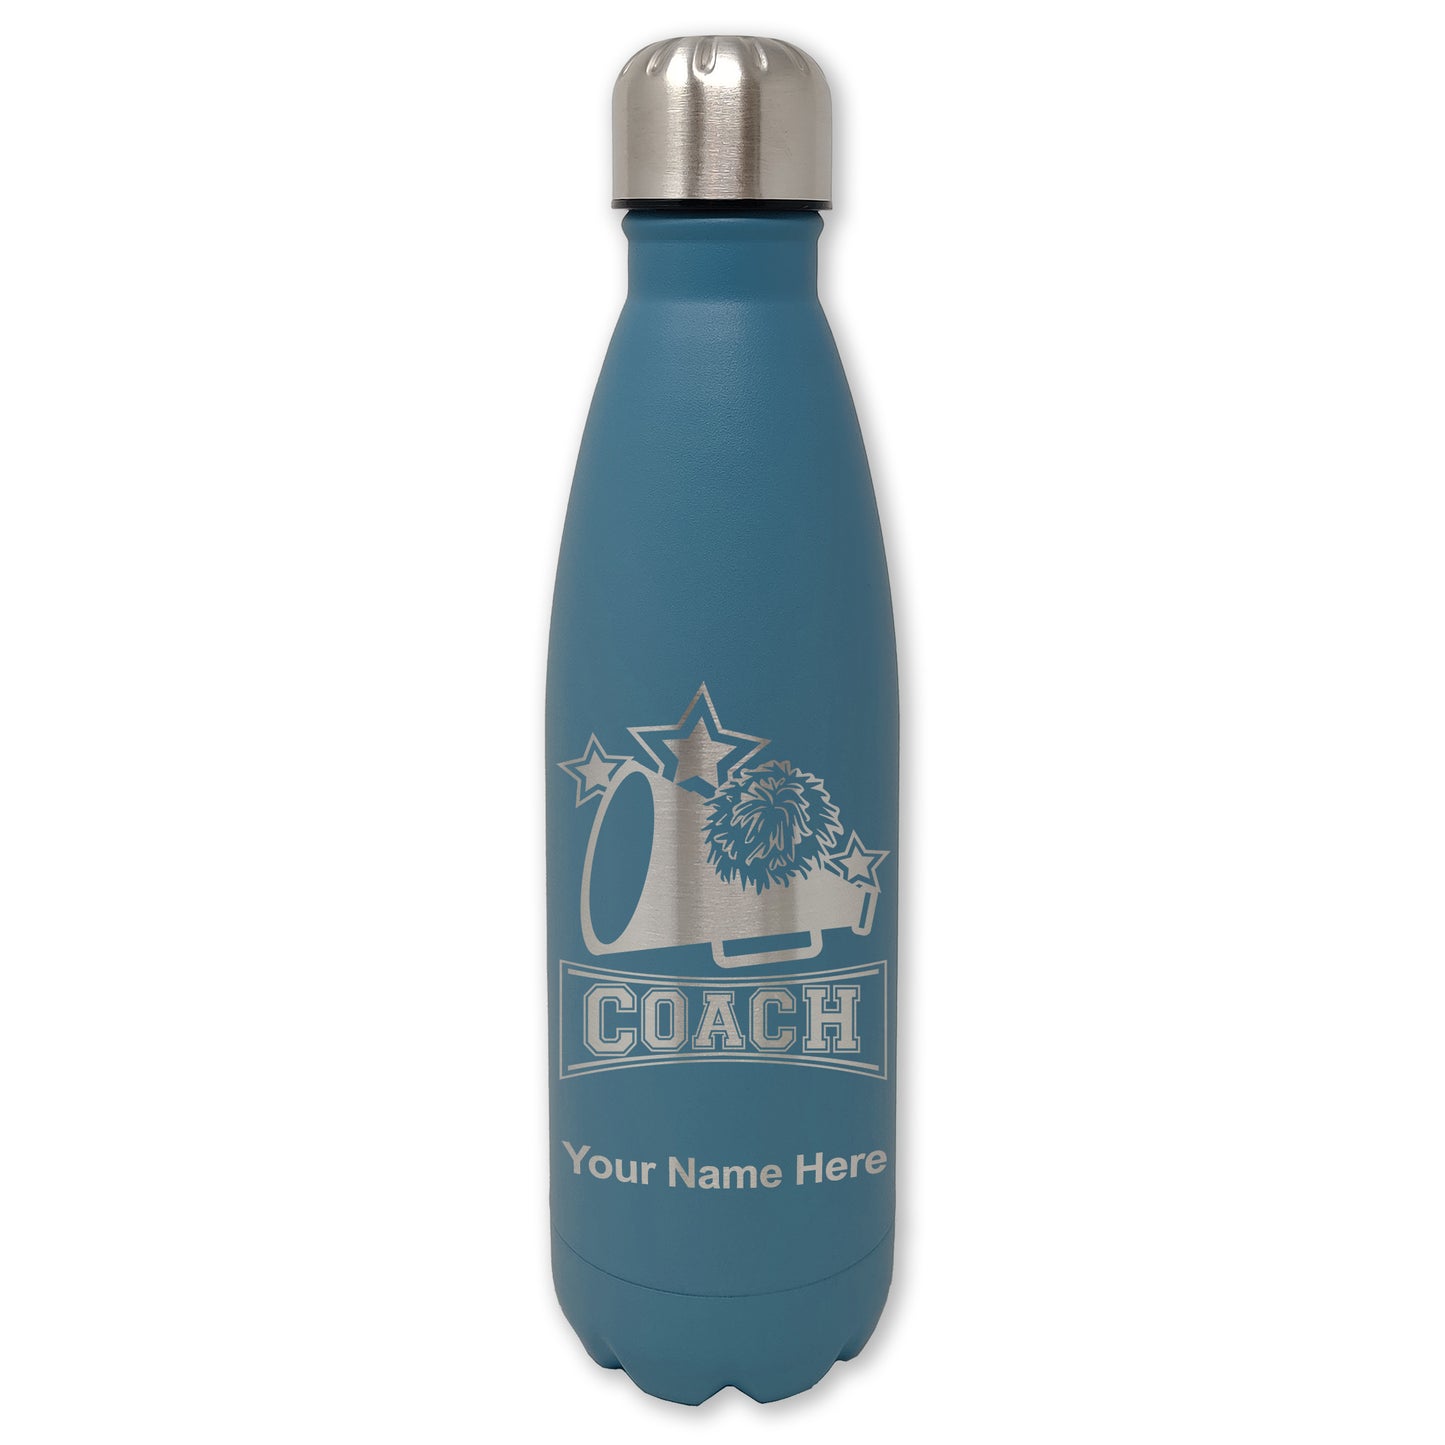 LaserGram Double Wall Water Bottle, Cheerleading Coach, Personalized Engraving Included